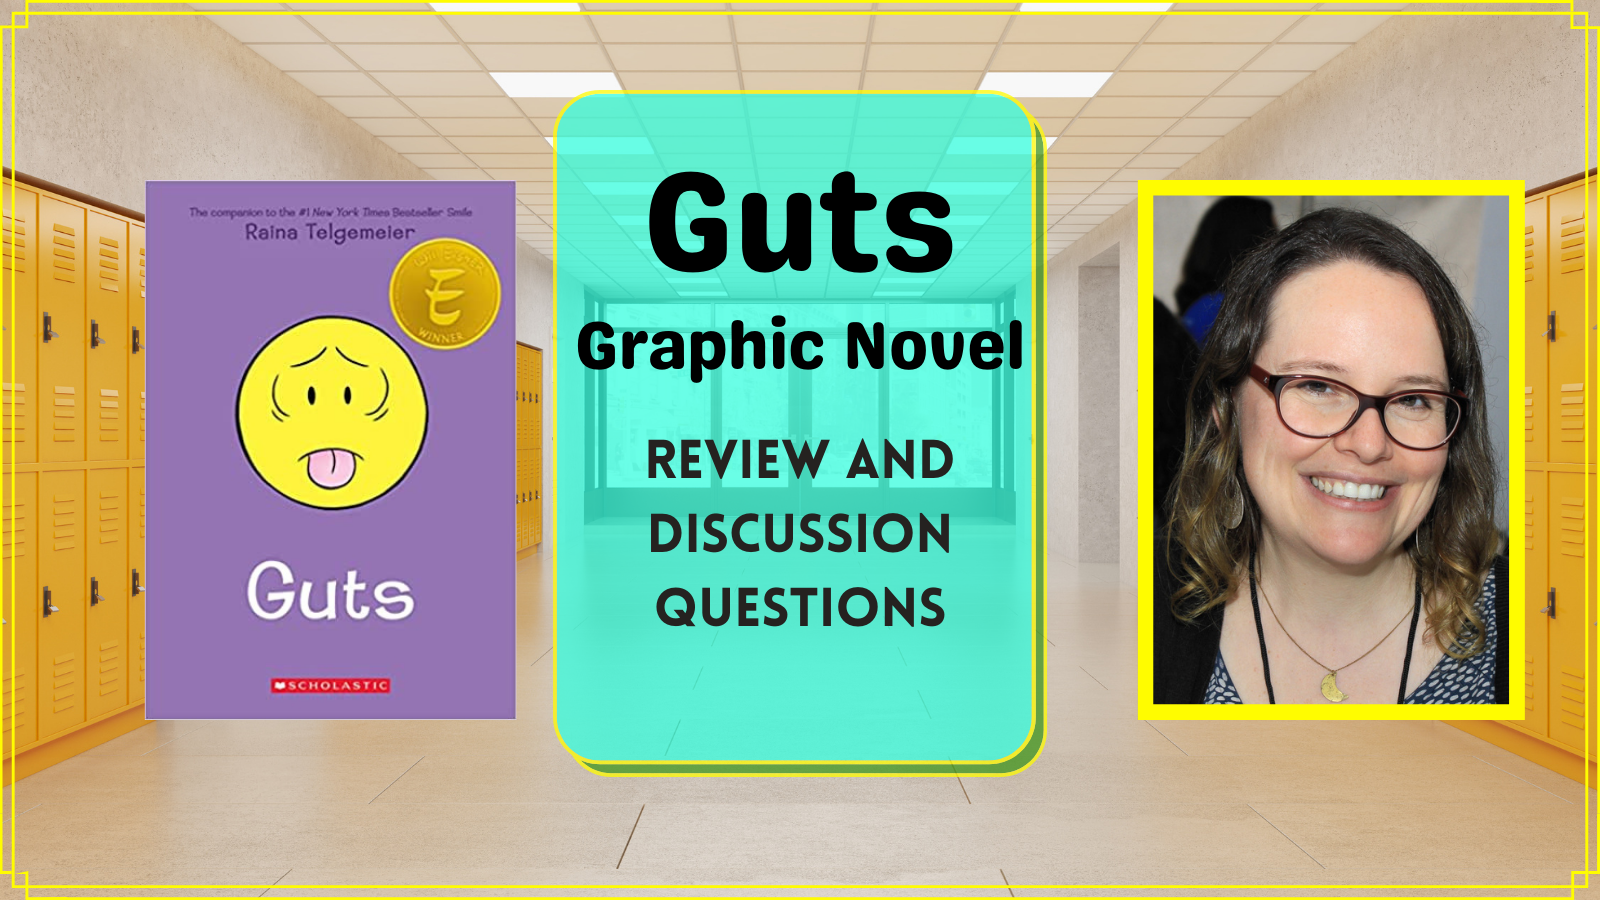 Guts Graphic Novel Review